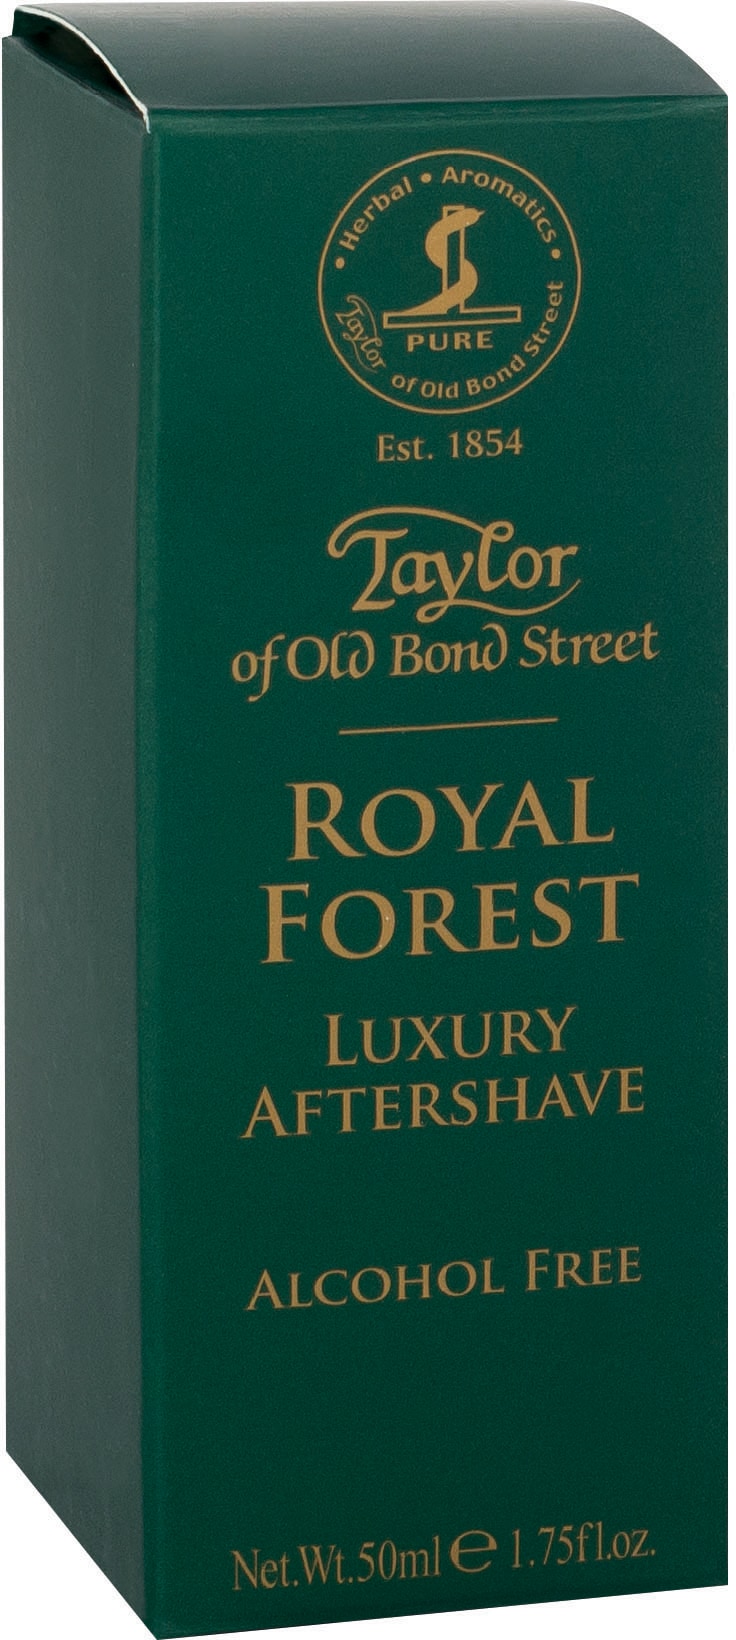 Bond »Luxury of Royal After-Shave Street Old Forest« Taylor Aftershave